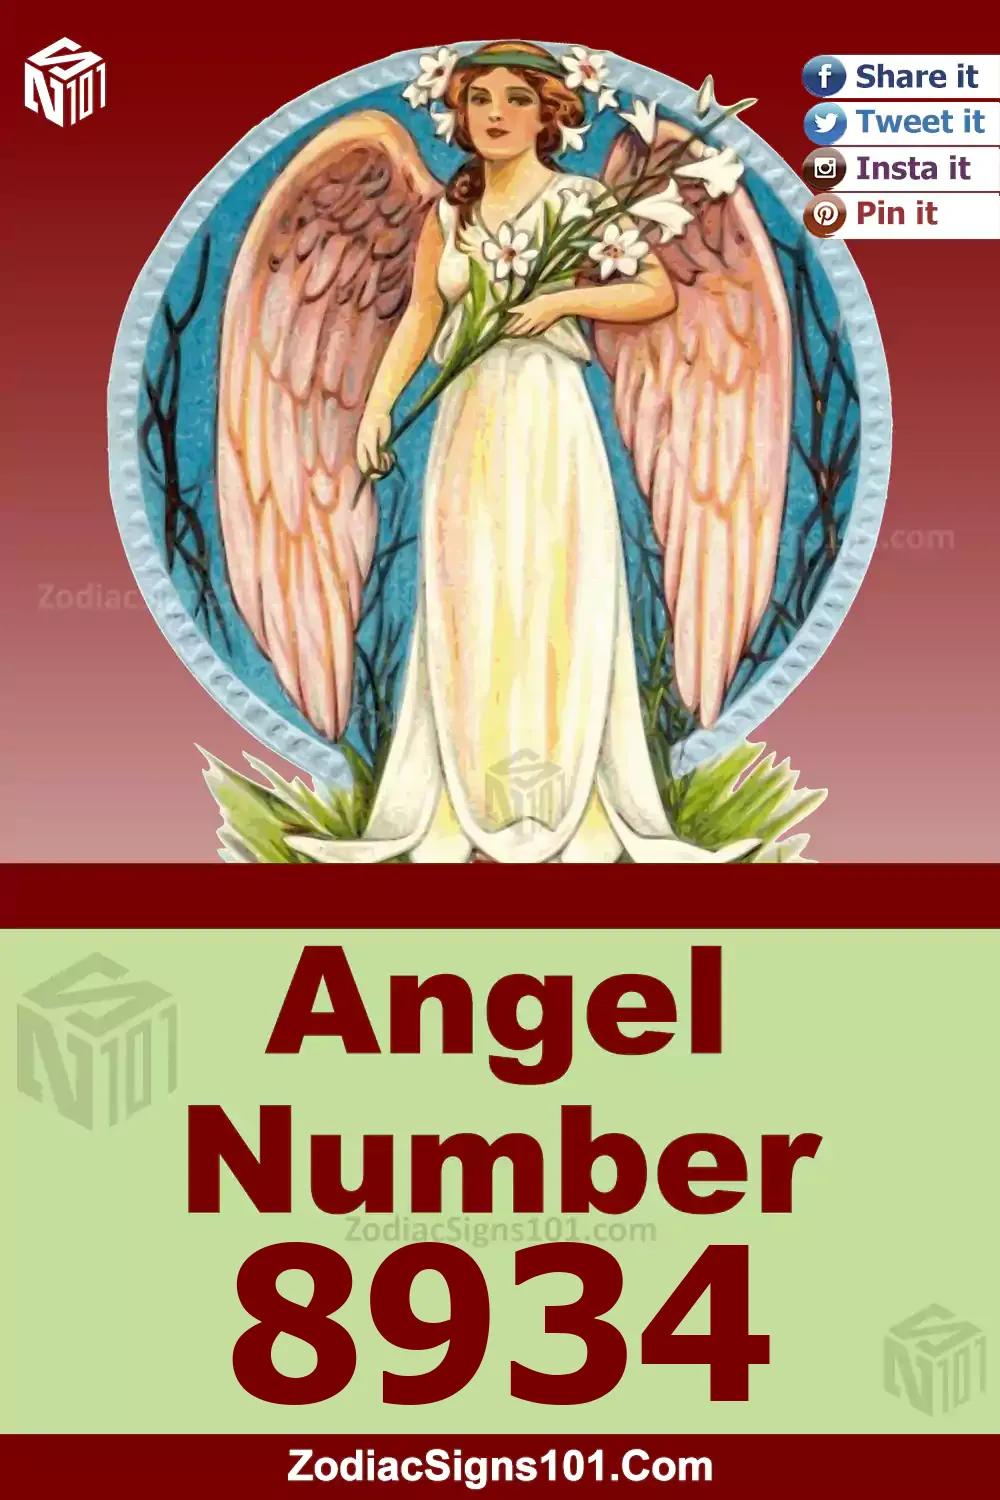 8934 Angel Number Meaning